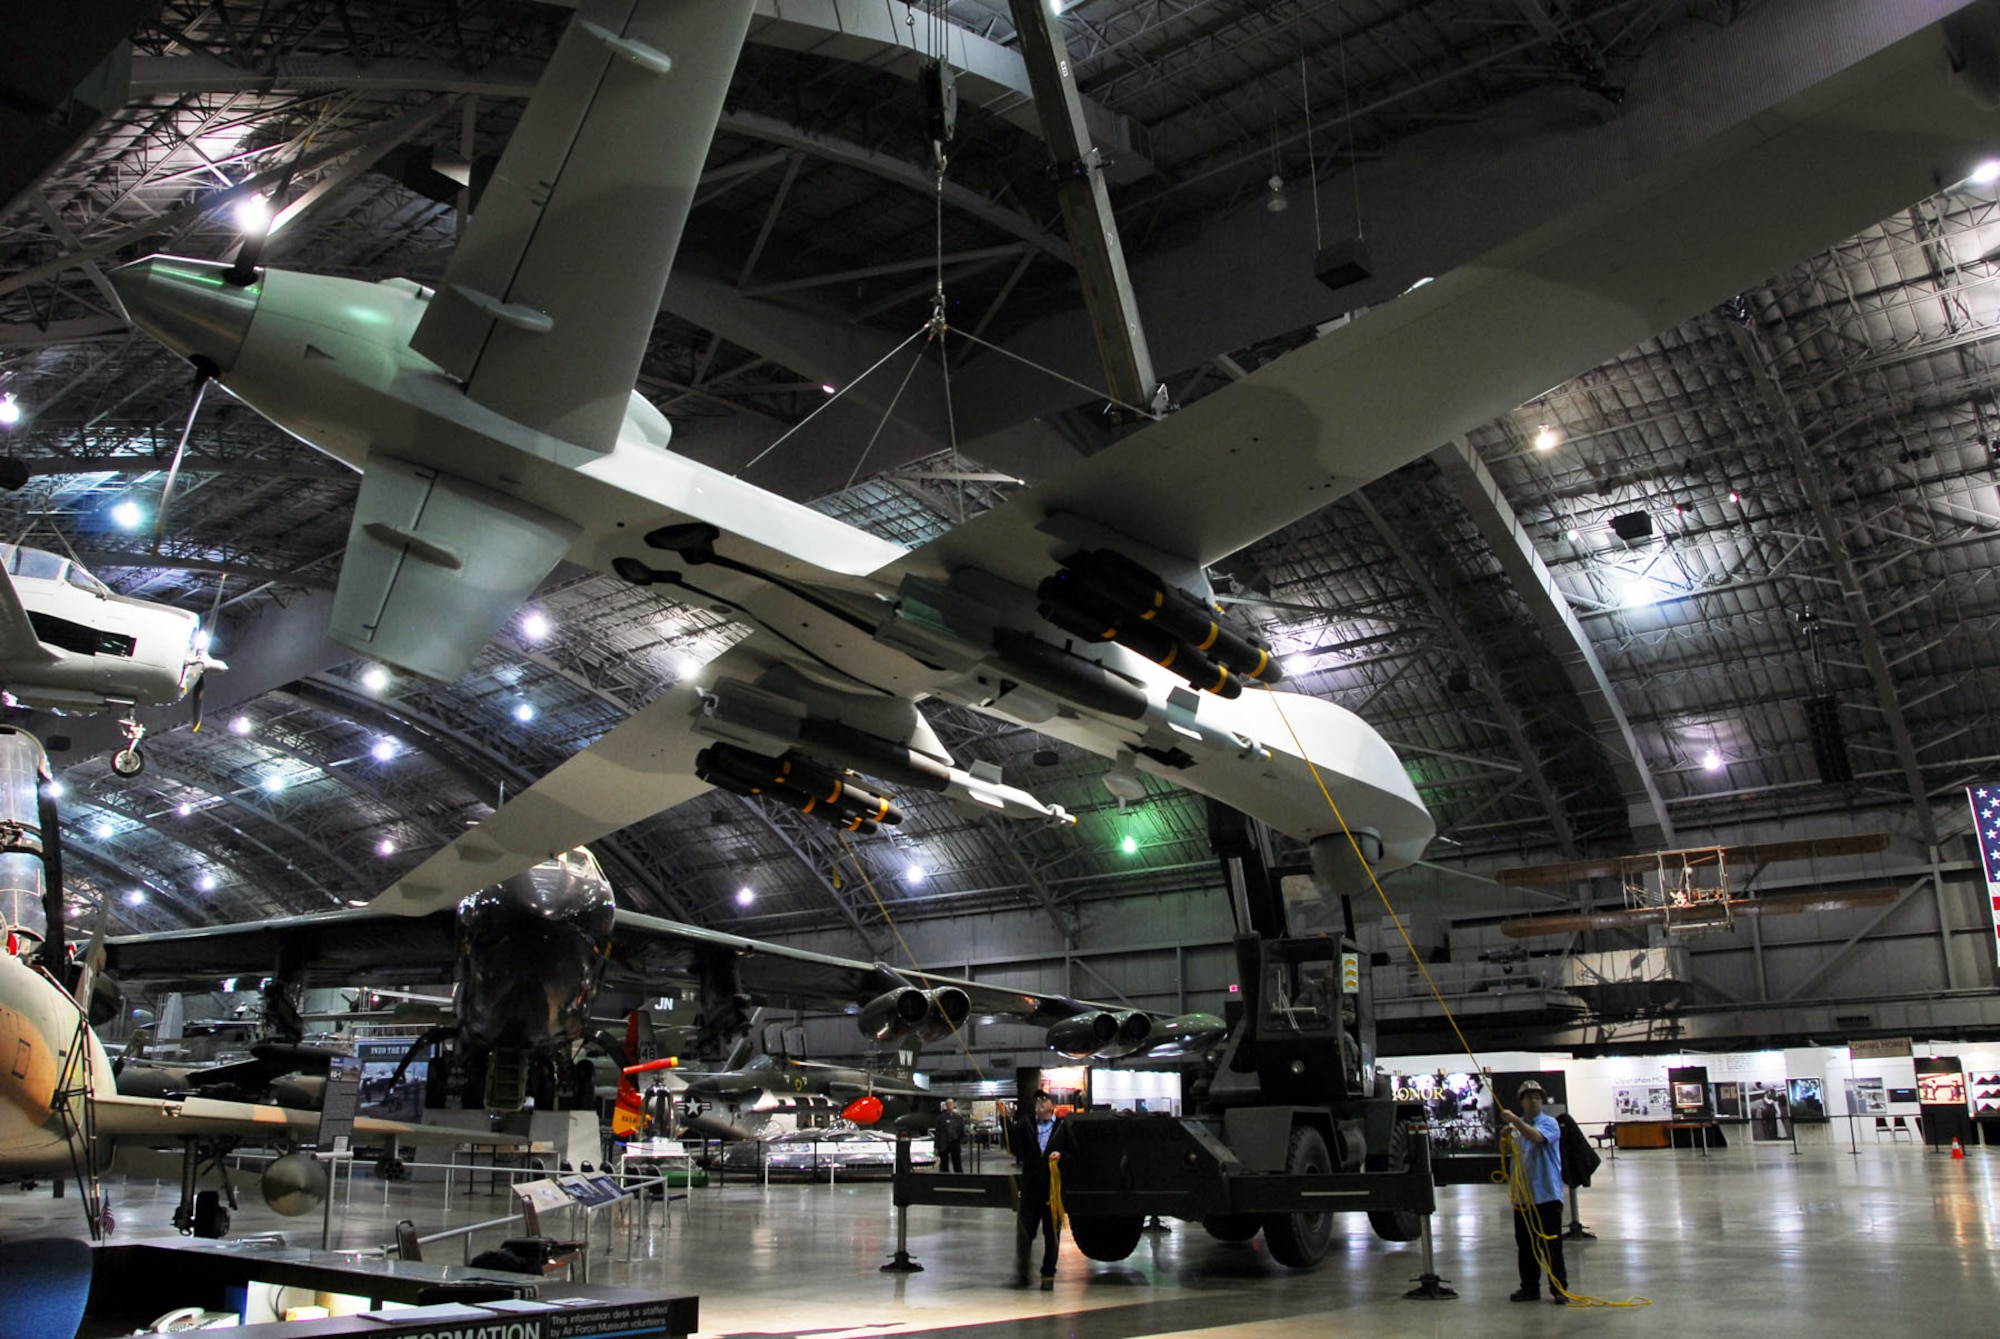 DAYTON, Ohio (01/2010) -- Restoration crews prepare to suspend the YMQ-9 Reaper from the ceiling at the National Museum of the U.S. Air Force. (U.S. Air Force photo)